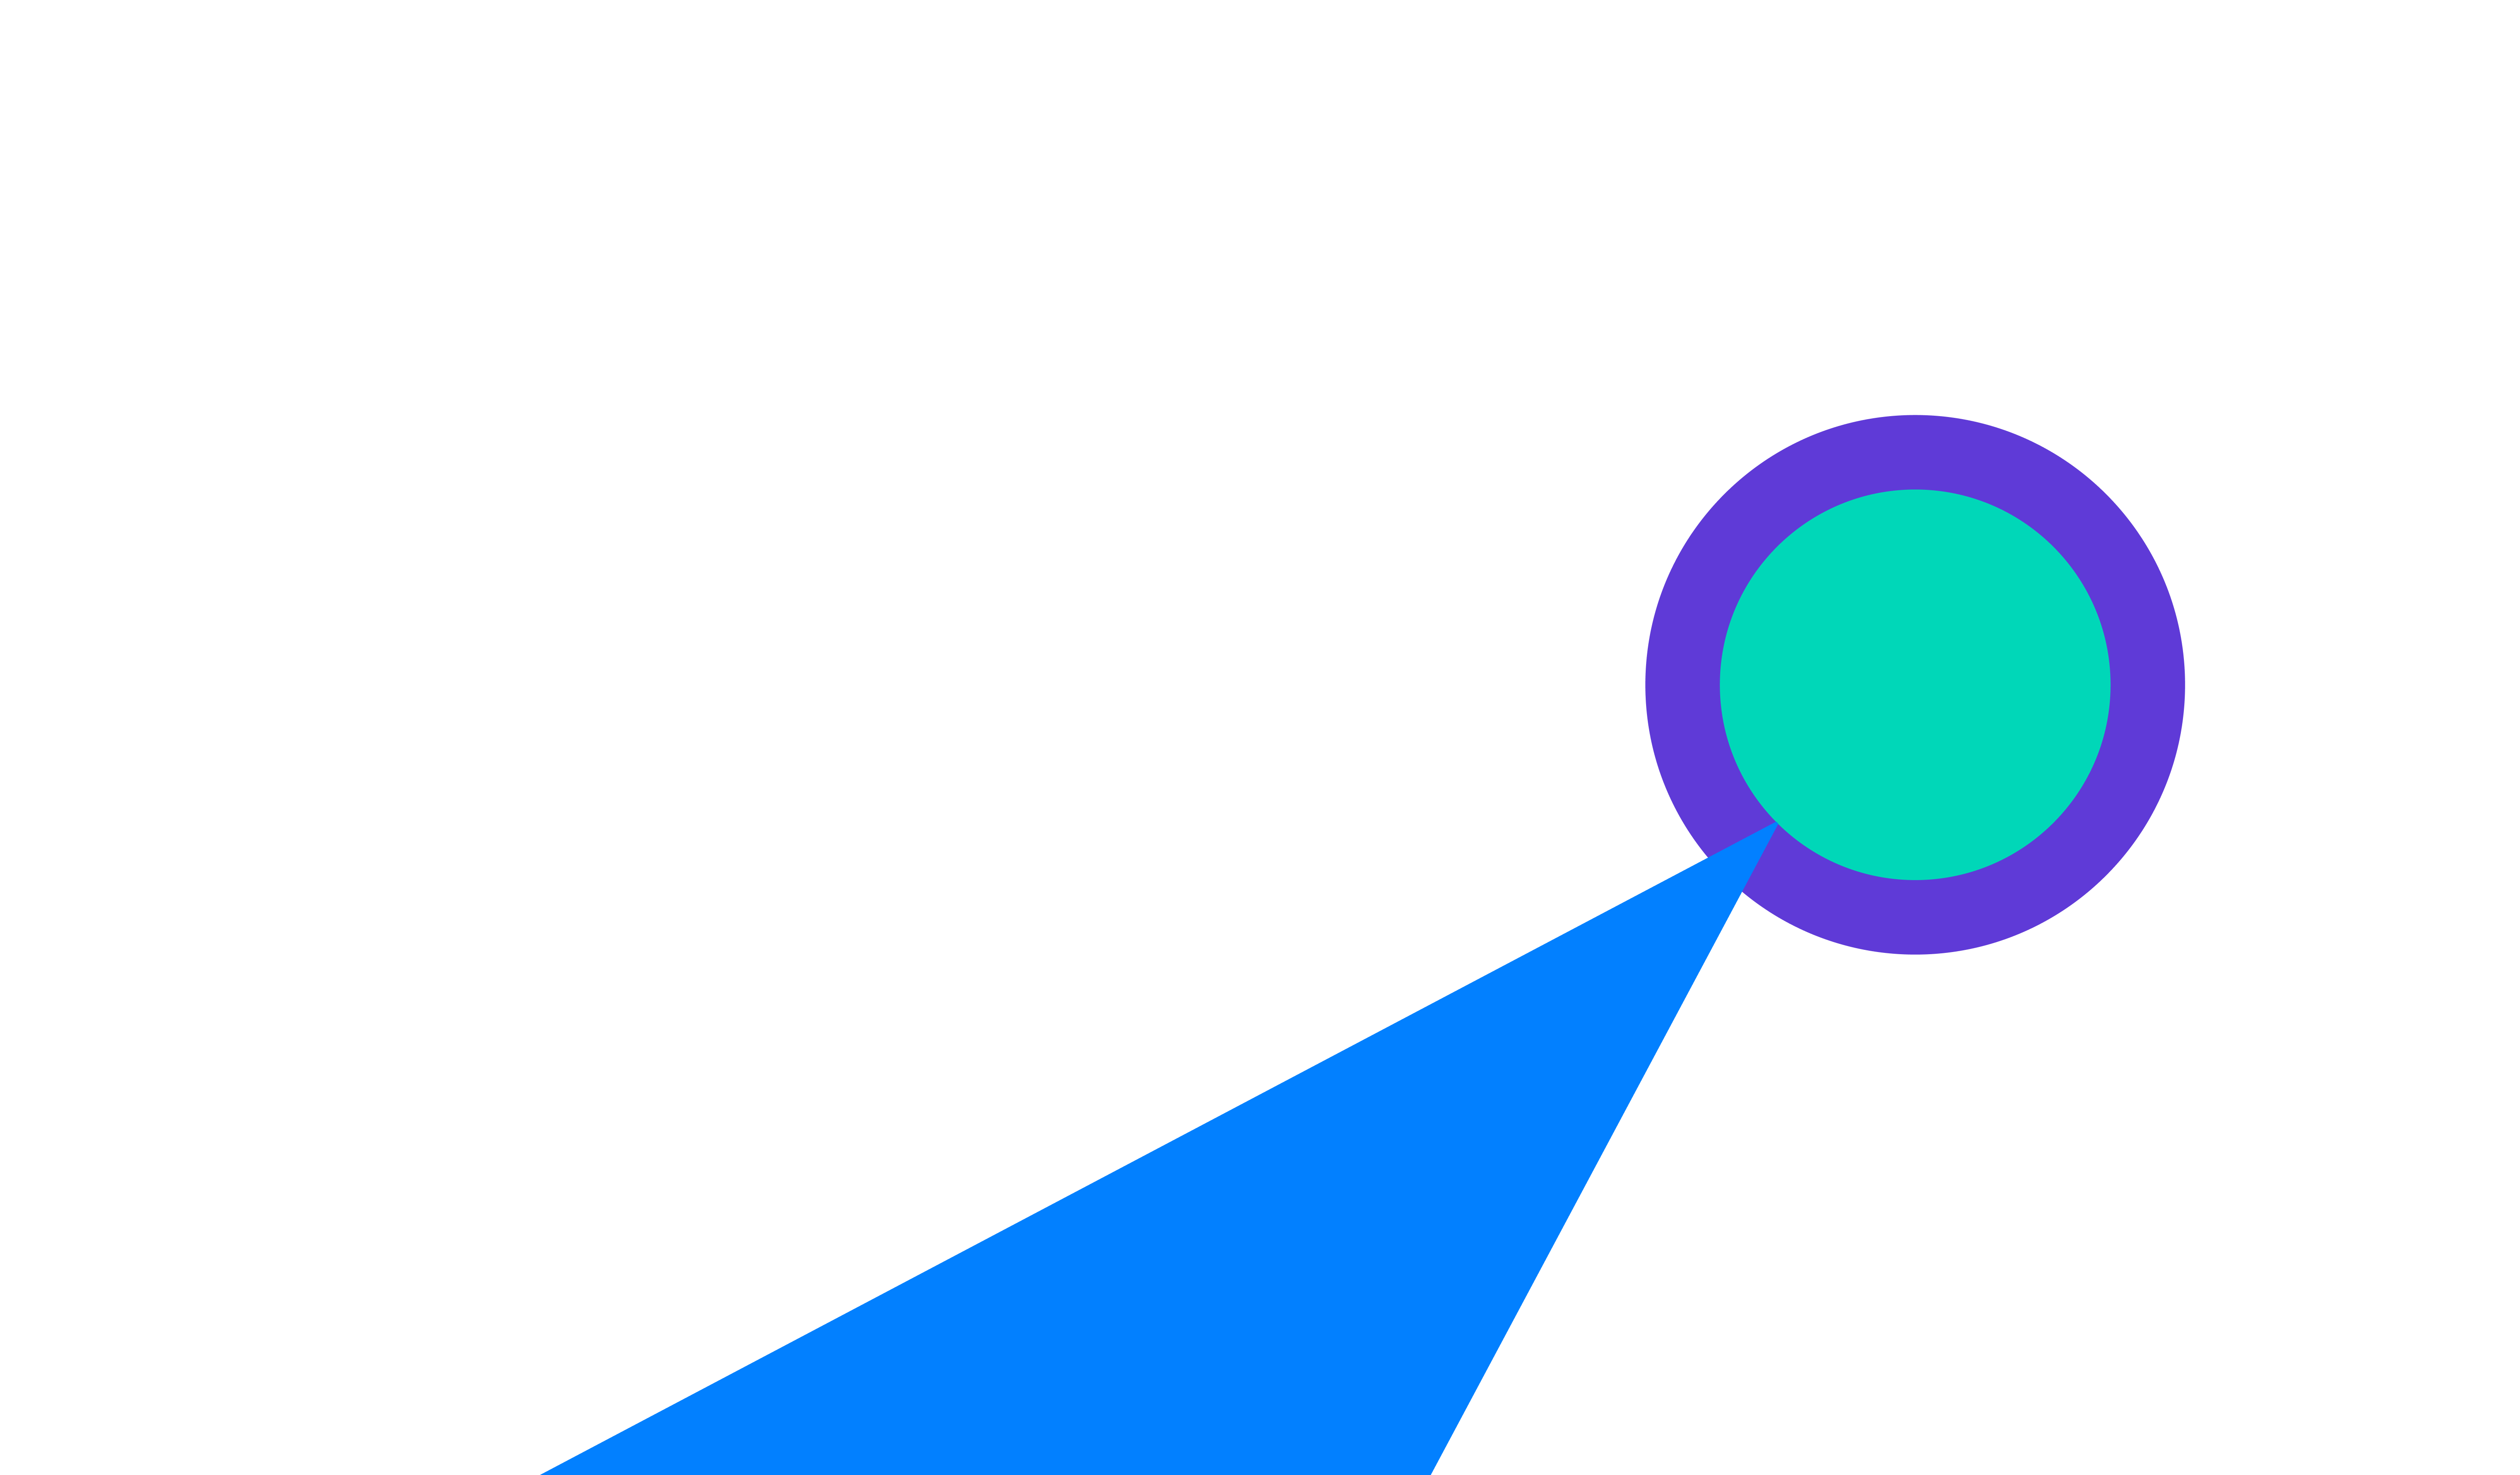 Stylistic illustration of a purple and green circle casting a blue spotlight